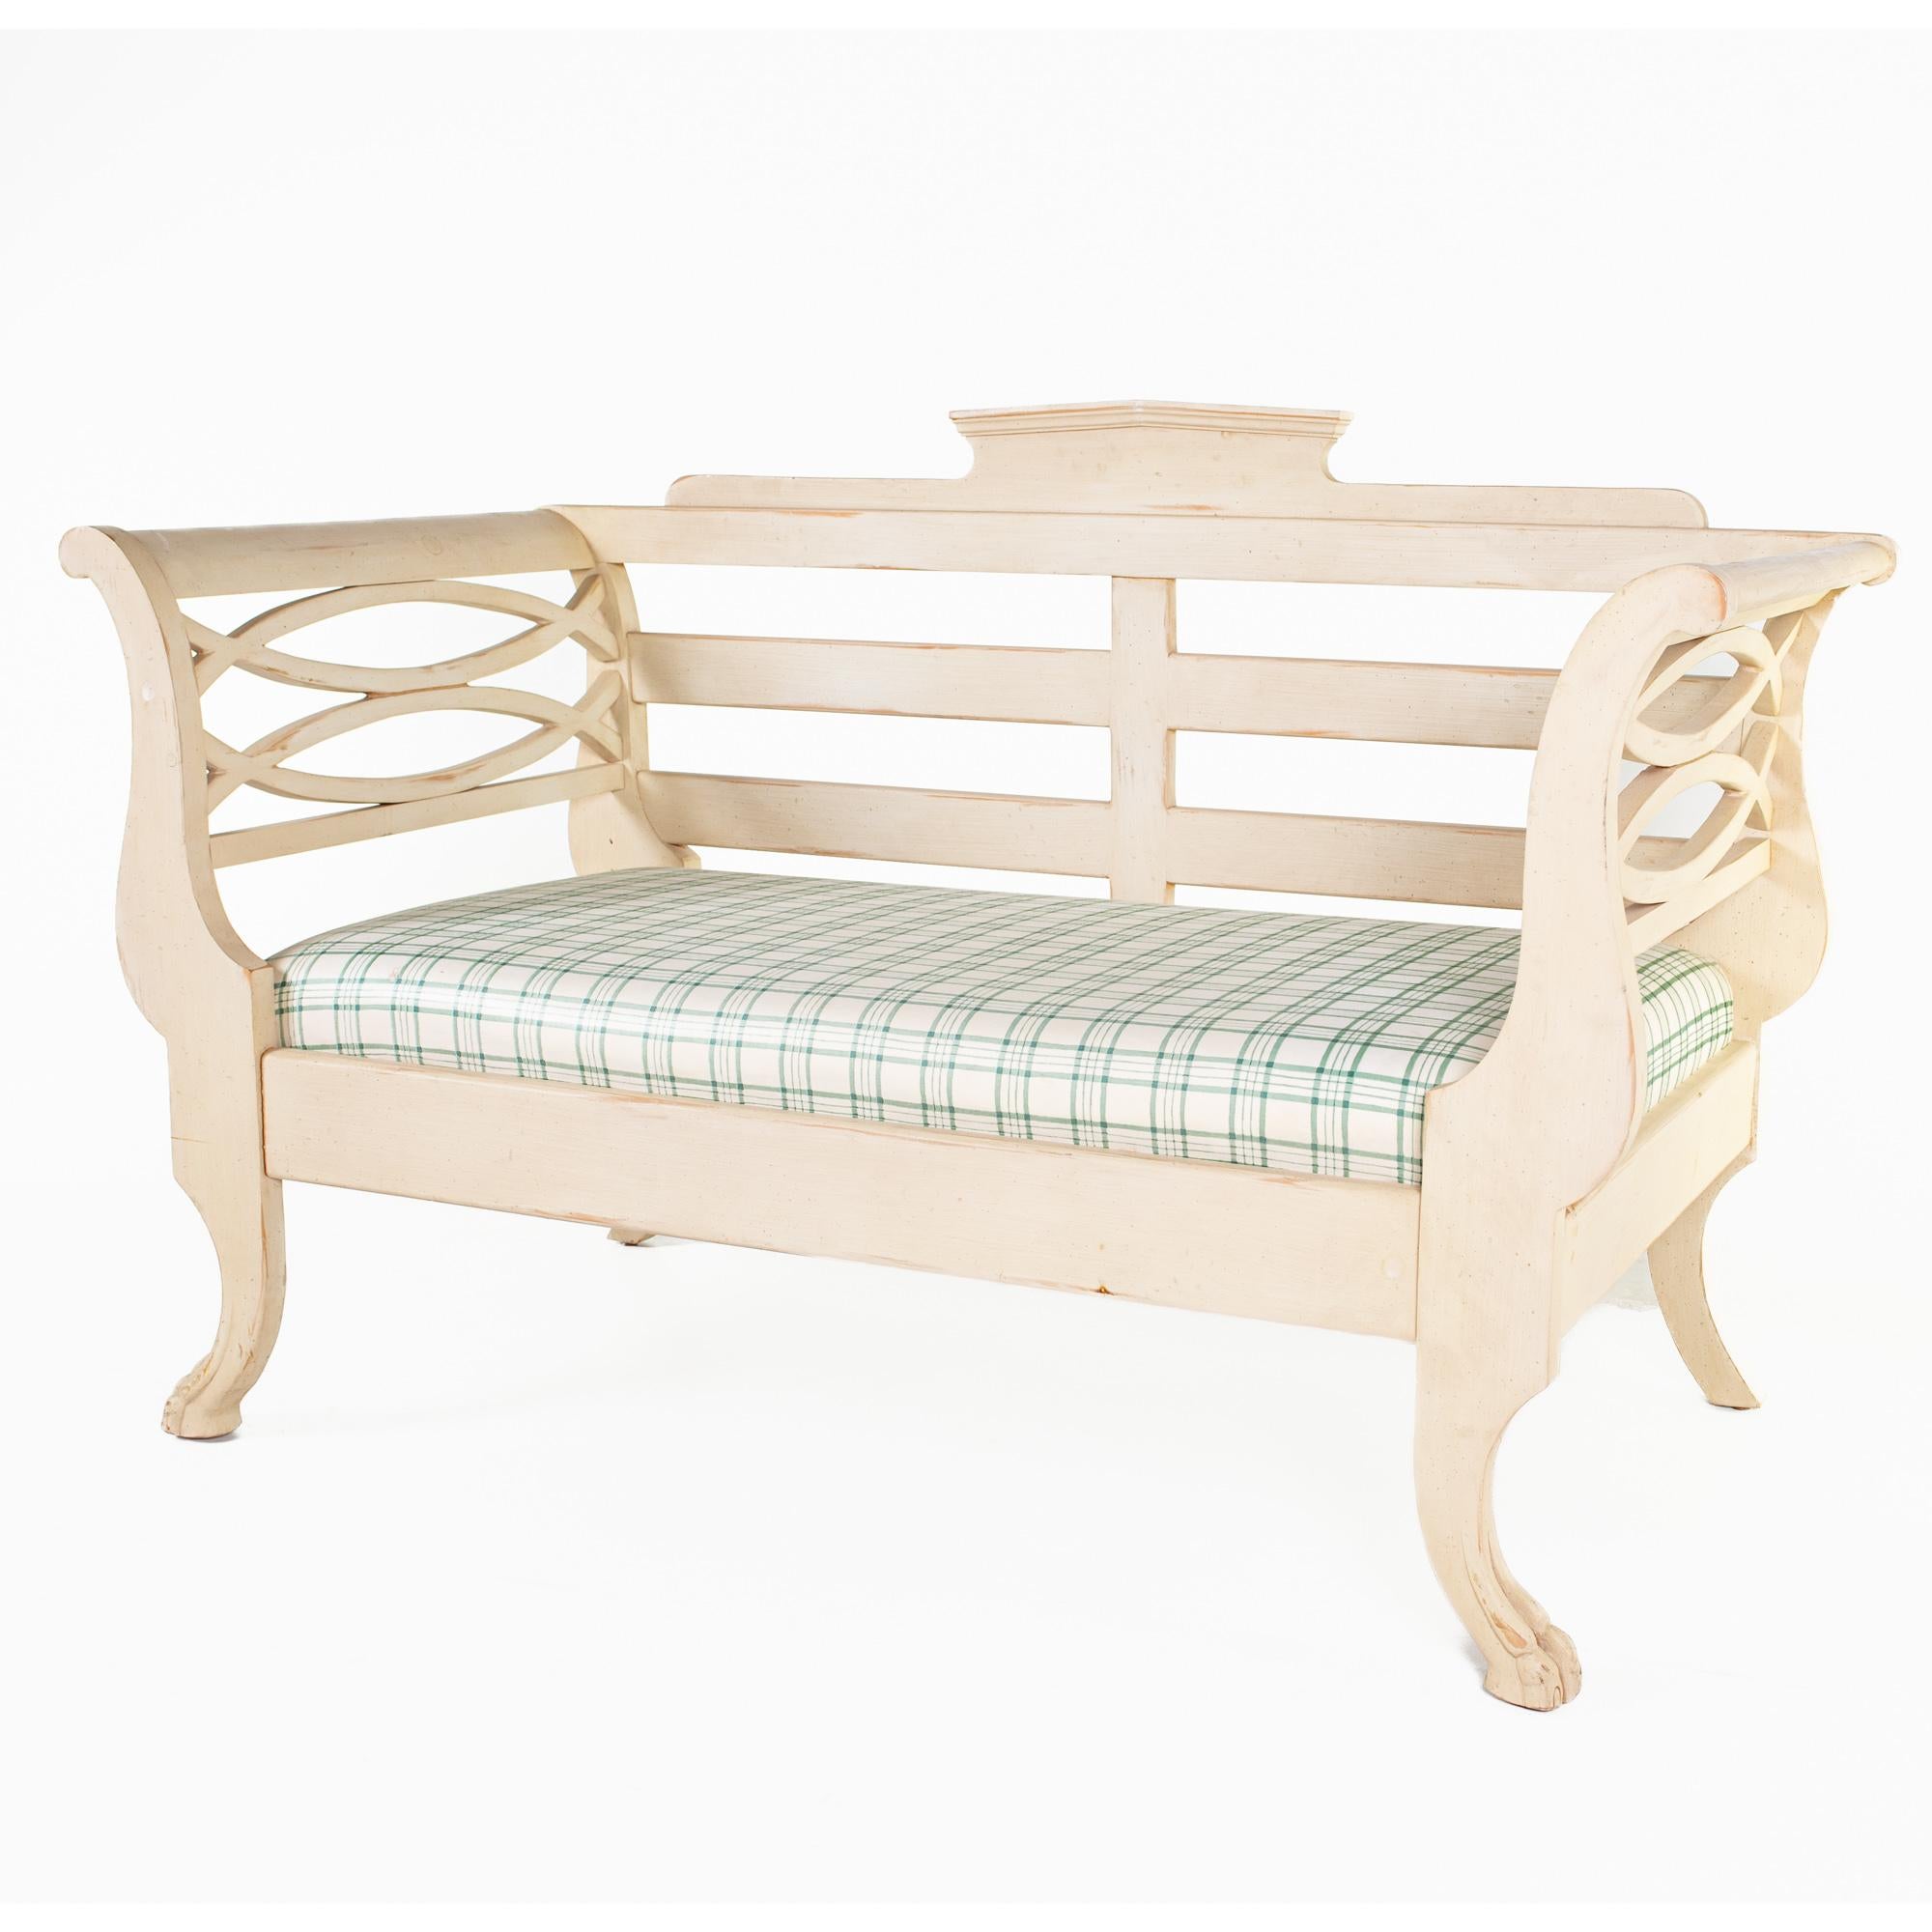 Drexel white daybed with green checker cushion

This daybed measures: 57.5 wide x 30 deep x 36.5 inches high, with a seat height of 18.5 and arm height of 32 inches

This daybed is in excellent vintage condition with minor marks, dents, and